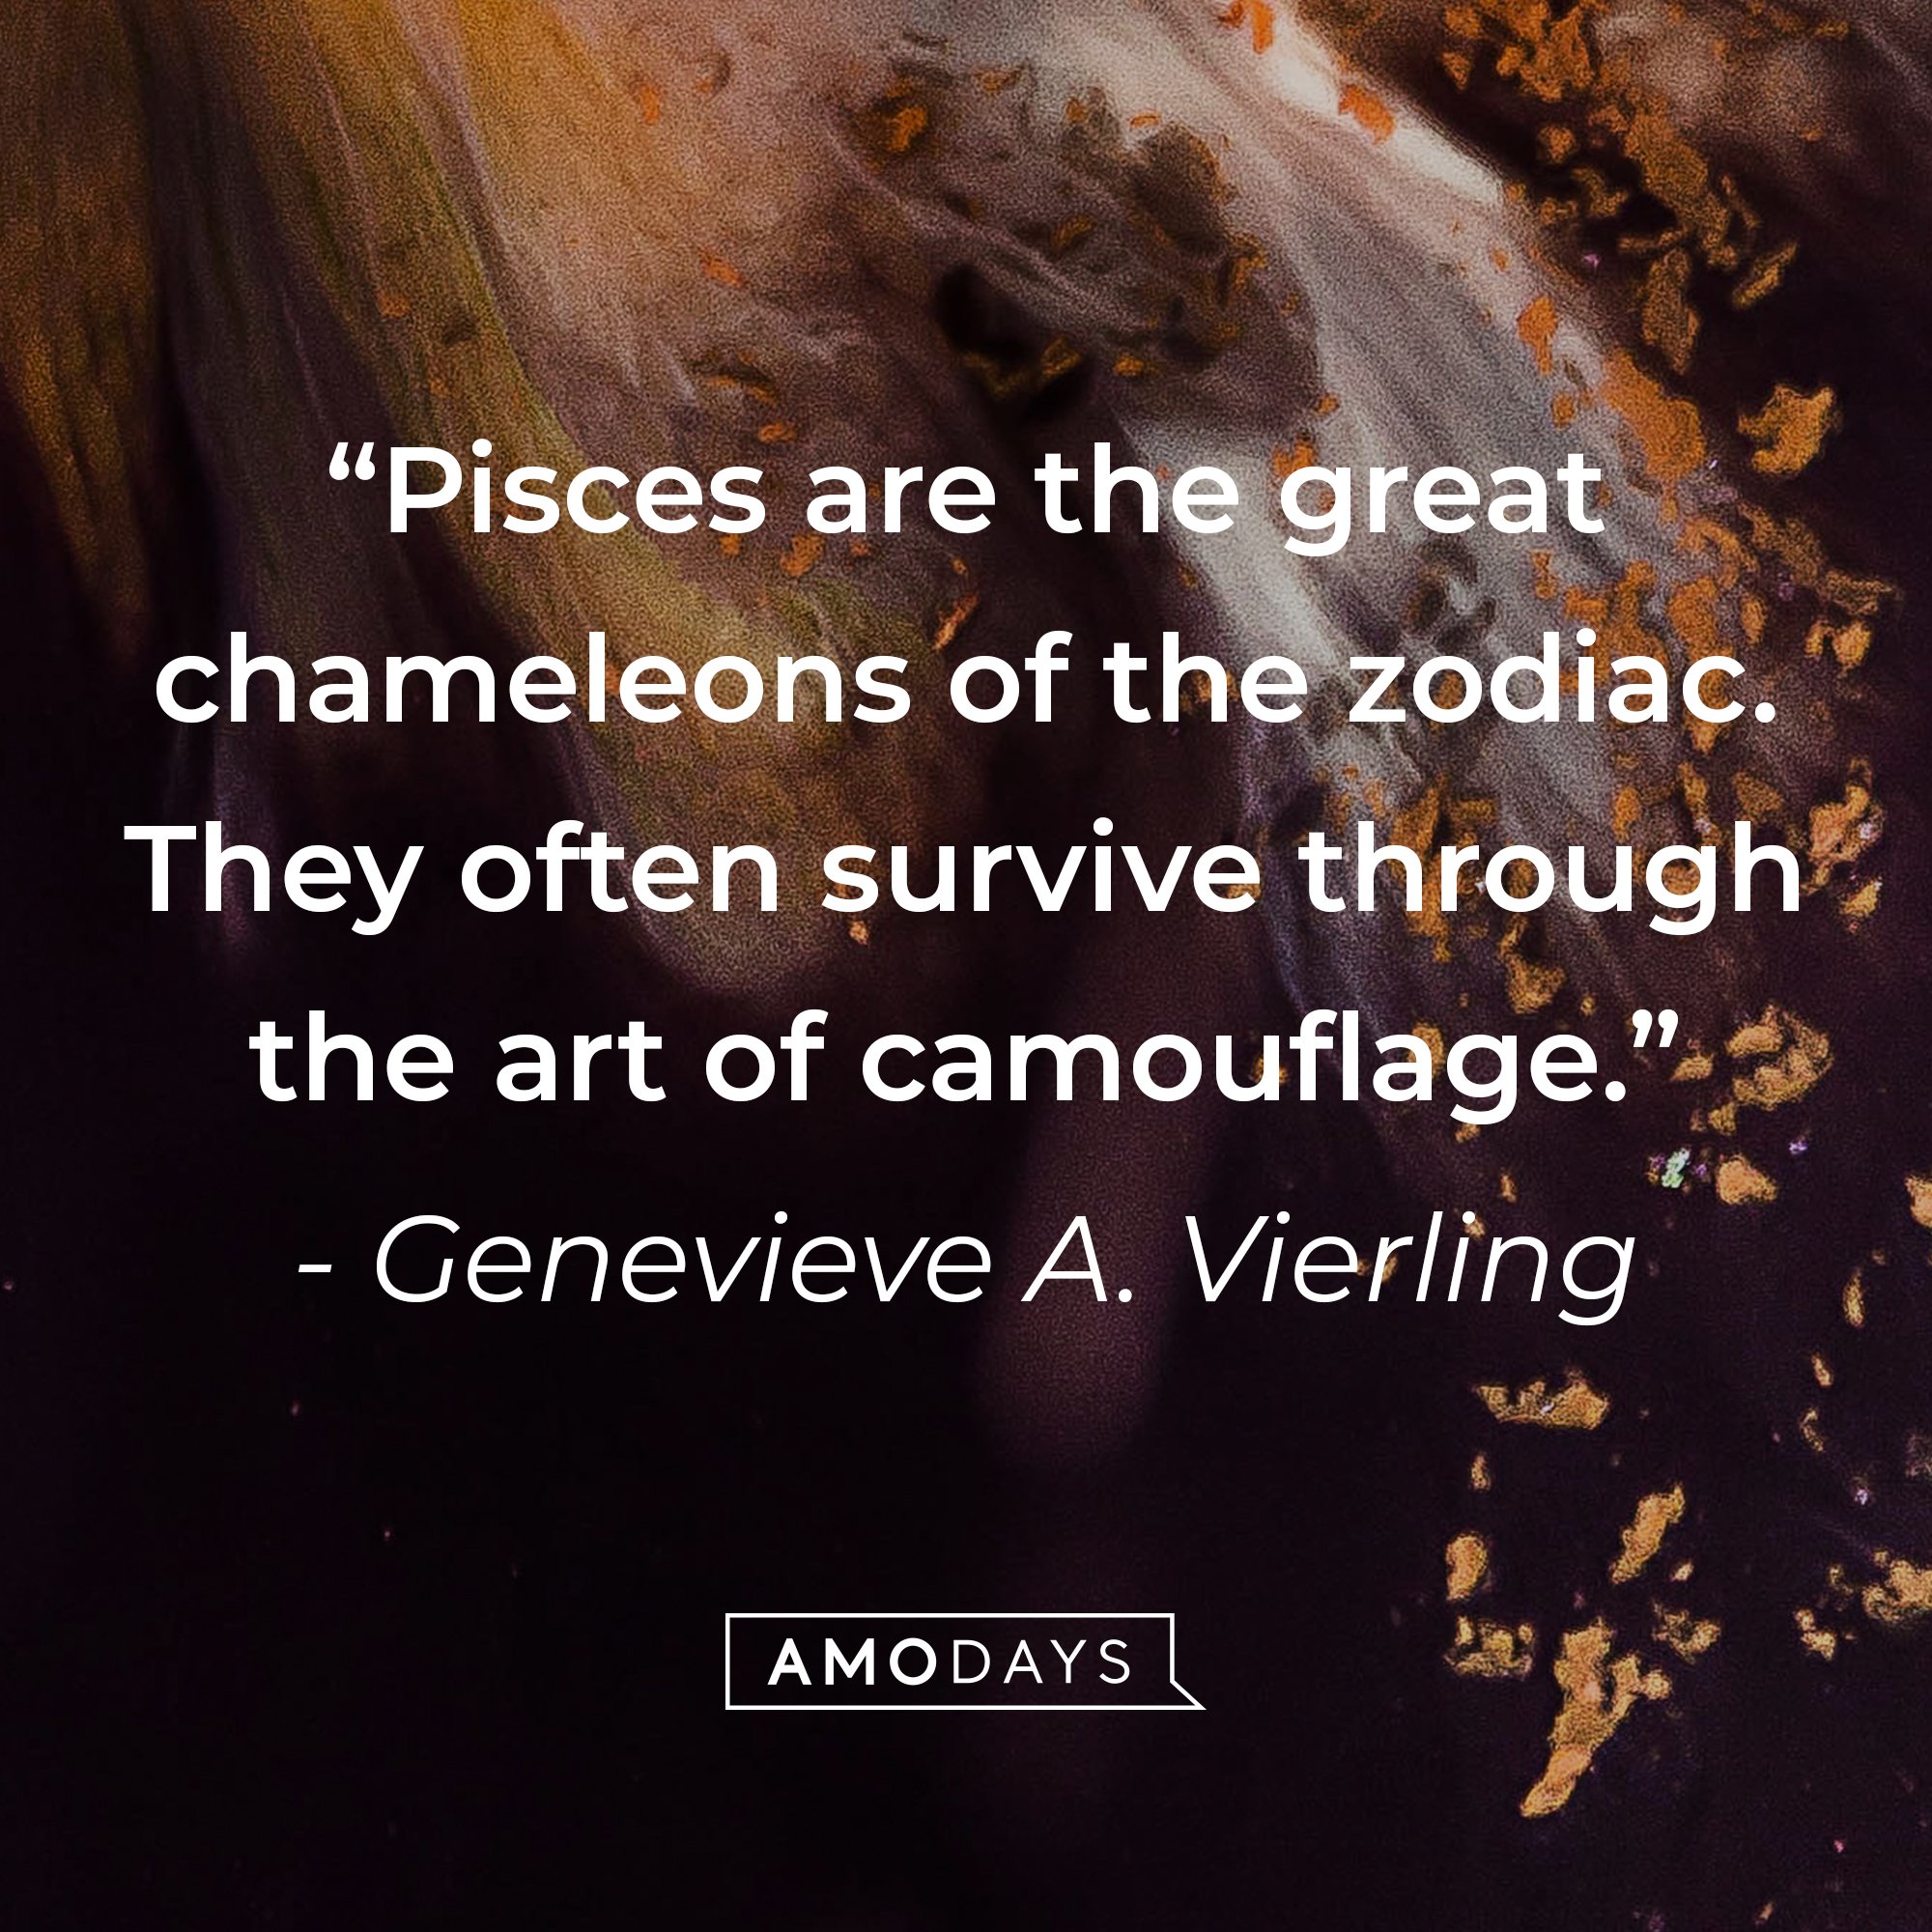 Genevieve A. Vierling's quote: "Pisces are the great chameleons of the zodiac. They often survive through the art of camouflage." | Image: AmoDays